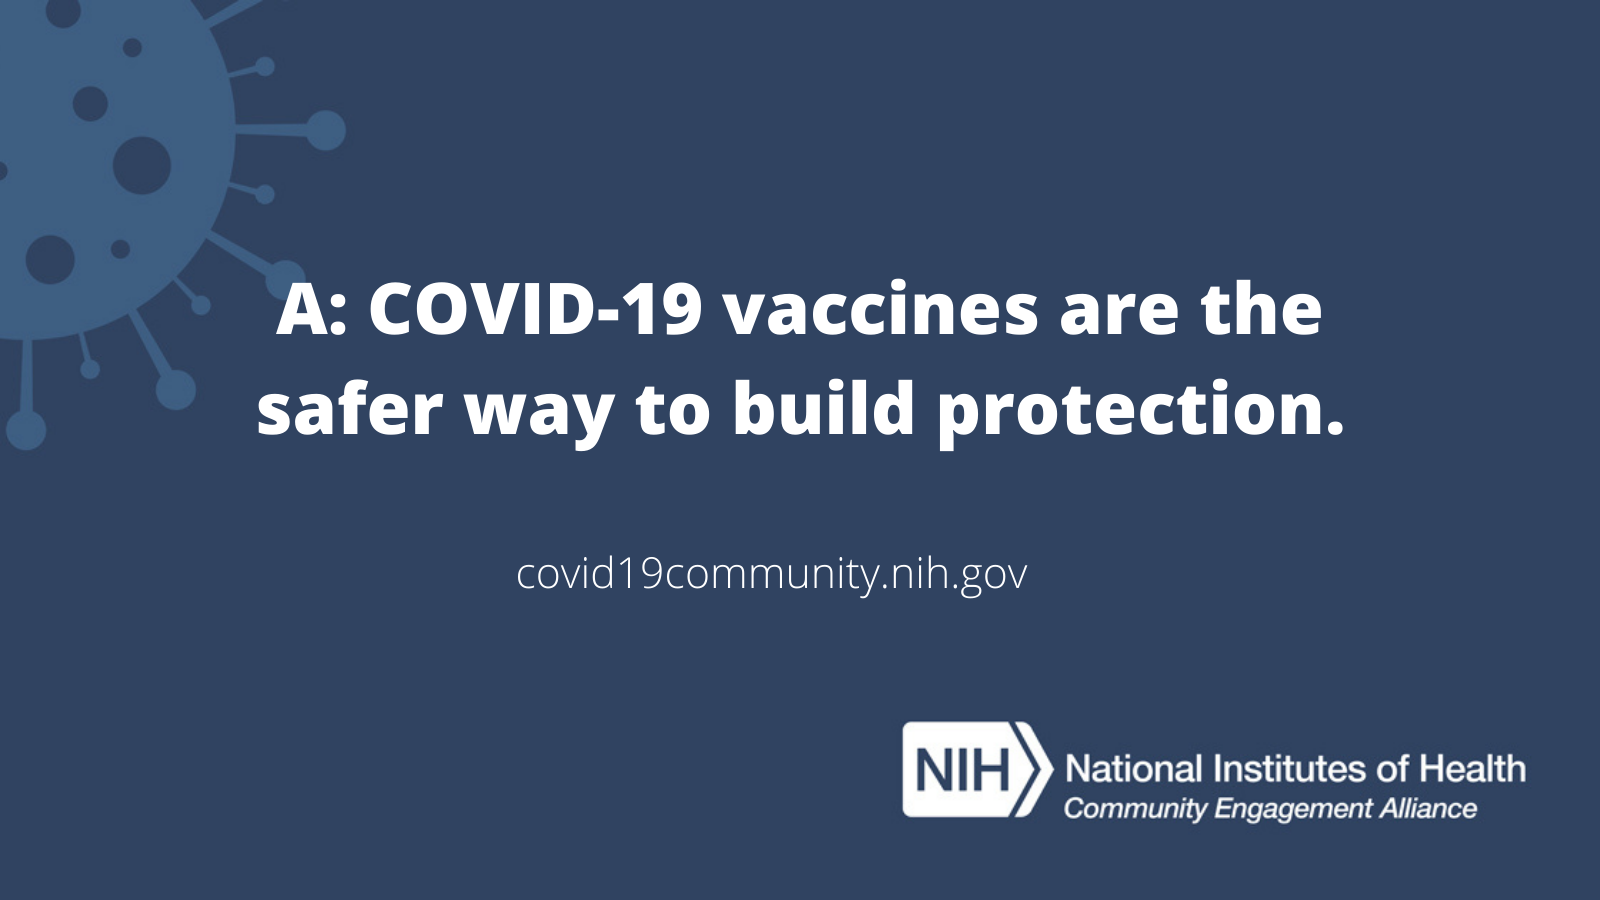 Text reads: “A: COVID-19 vaccines are the safer way to build protection."